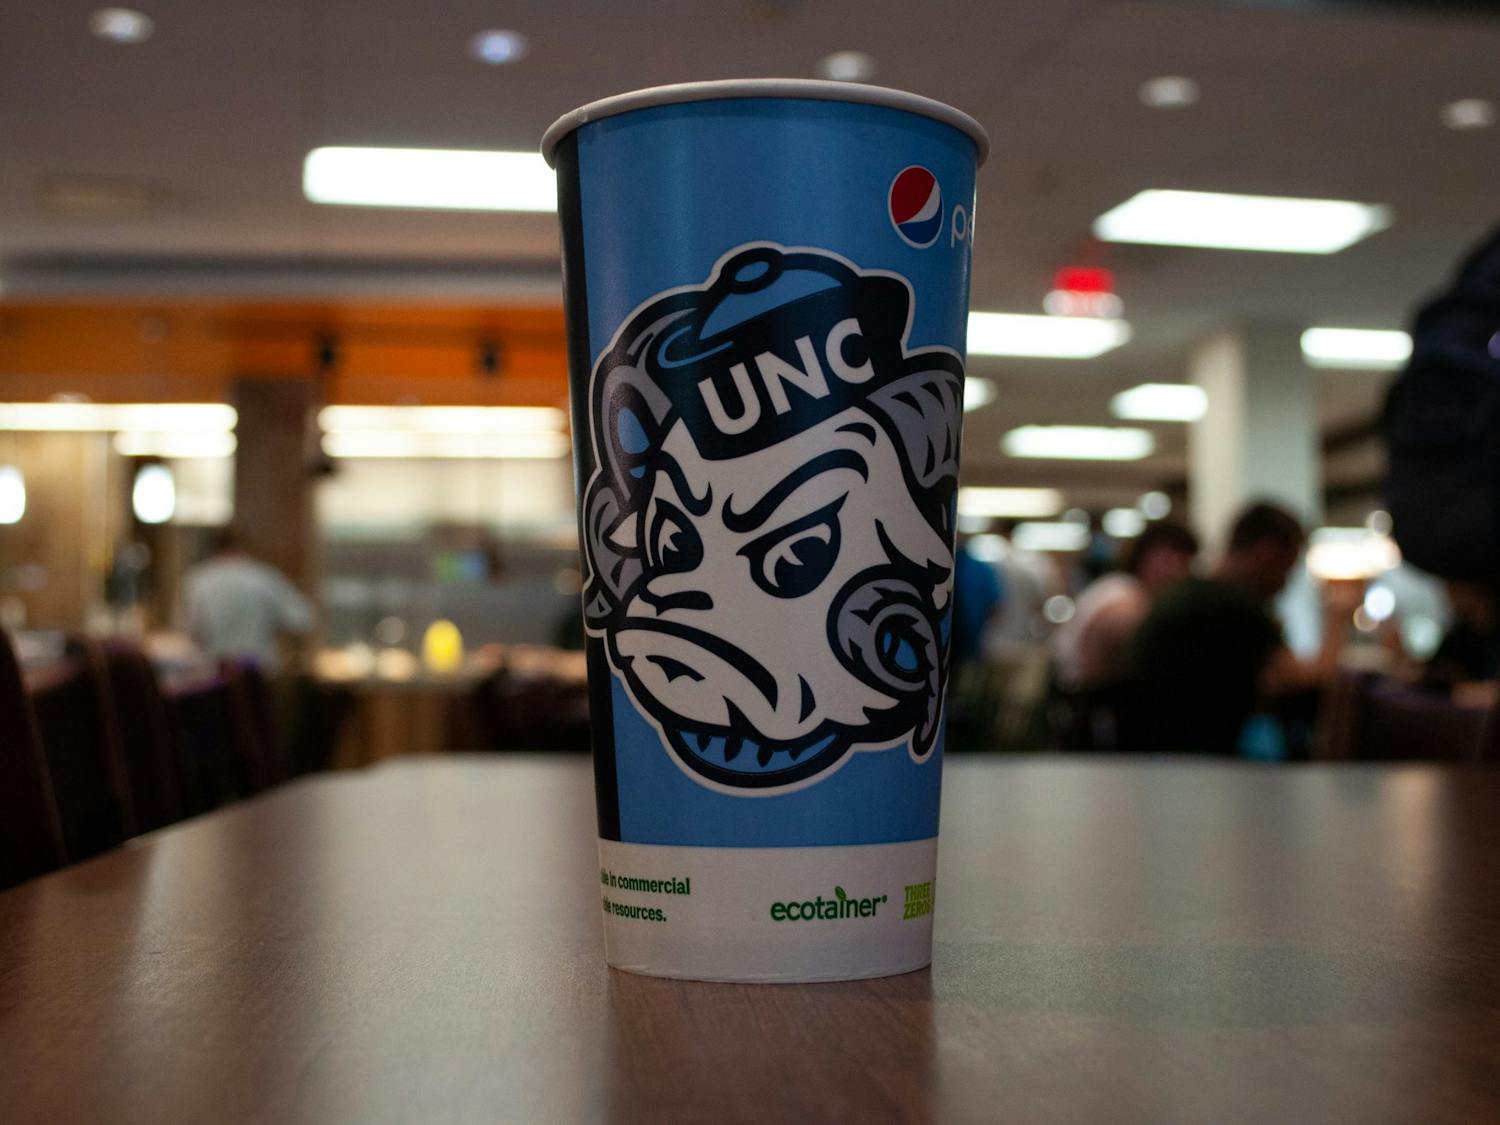 Carolina Dining Services ends the use of disposable cups in Lenoir Hall on Monday, March 3, 2022.